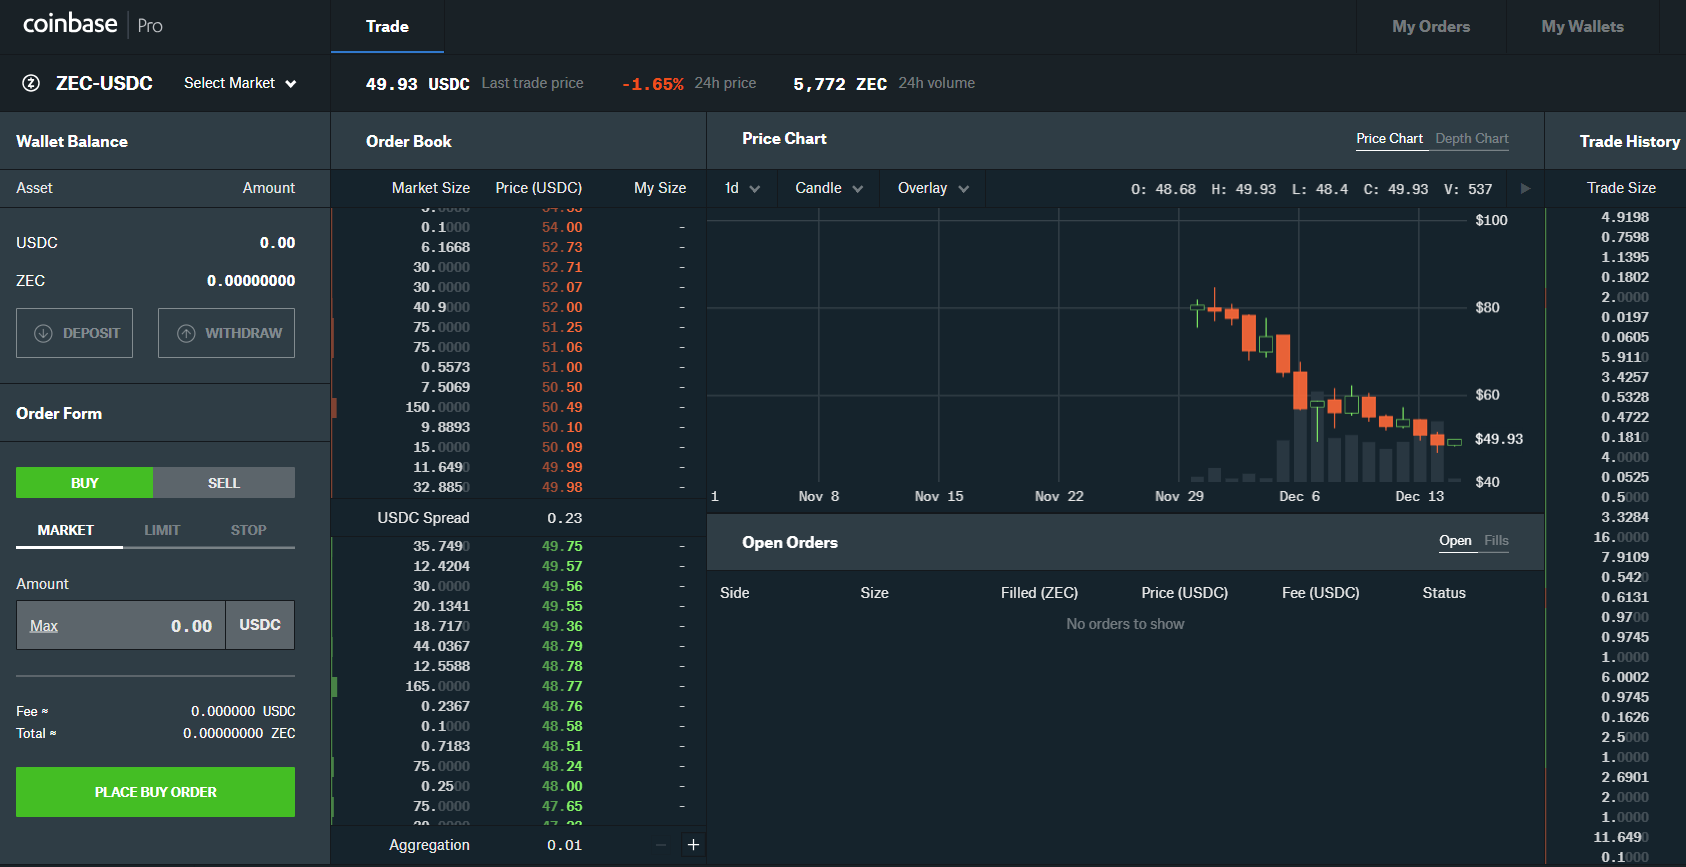 photo of Coinbase pro trading interface